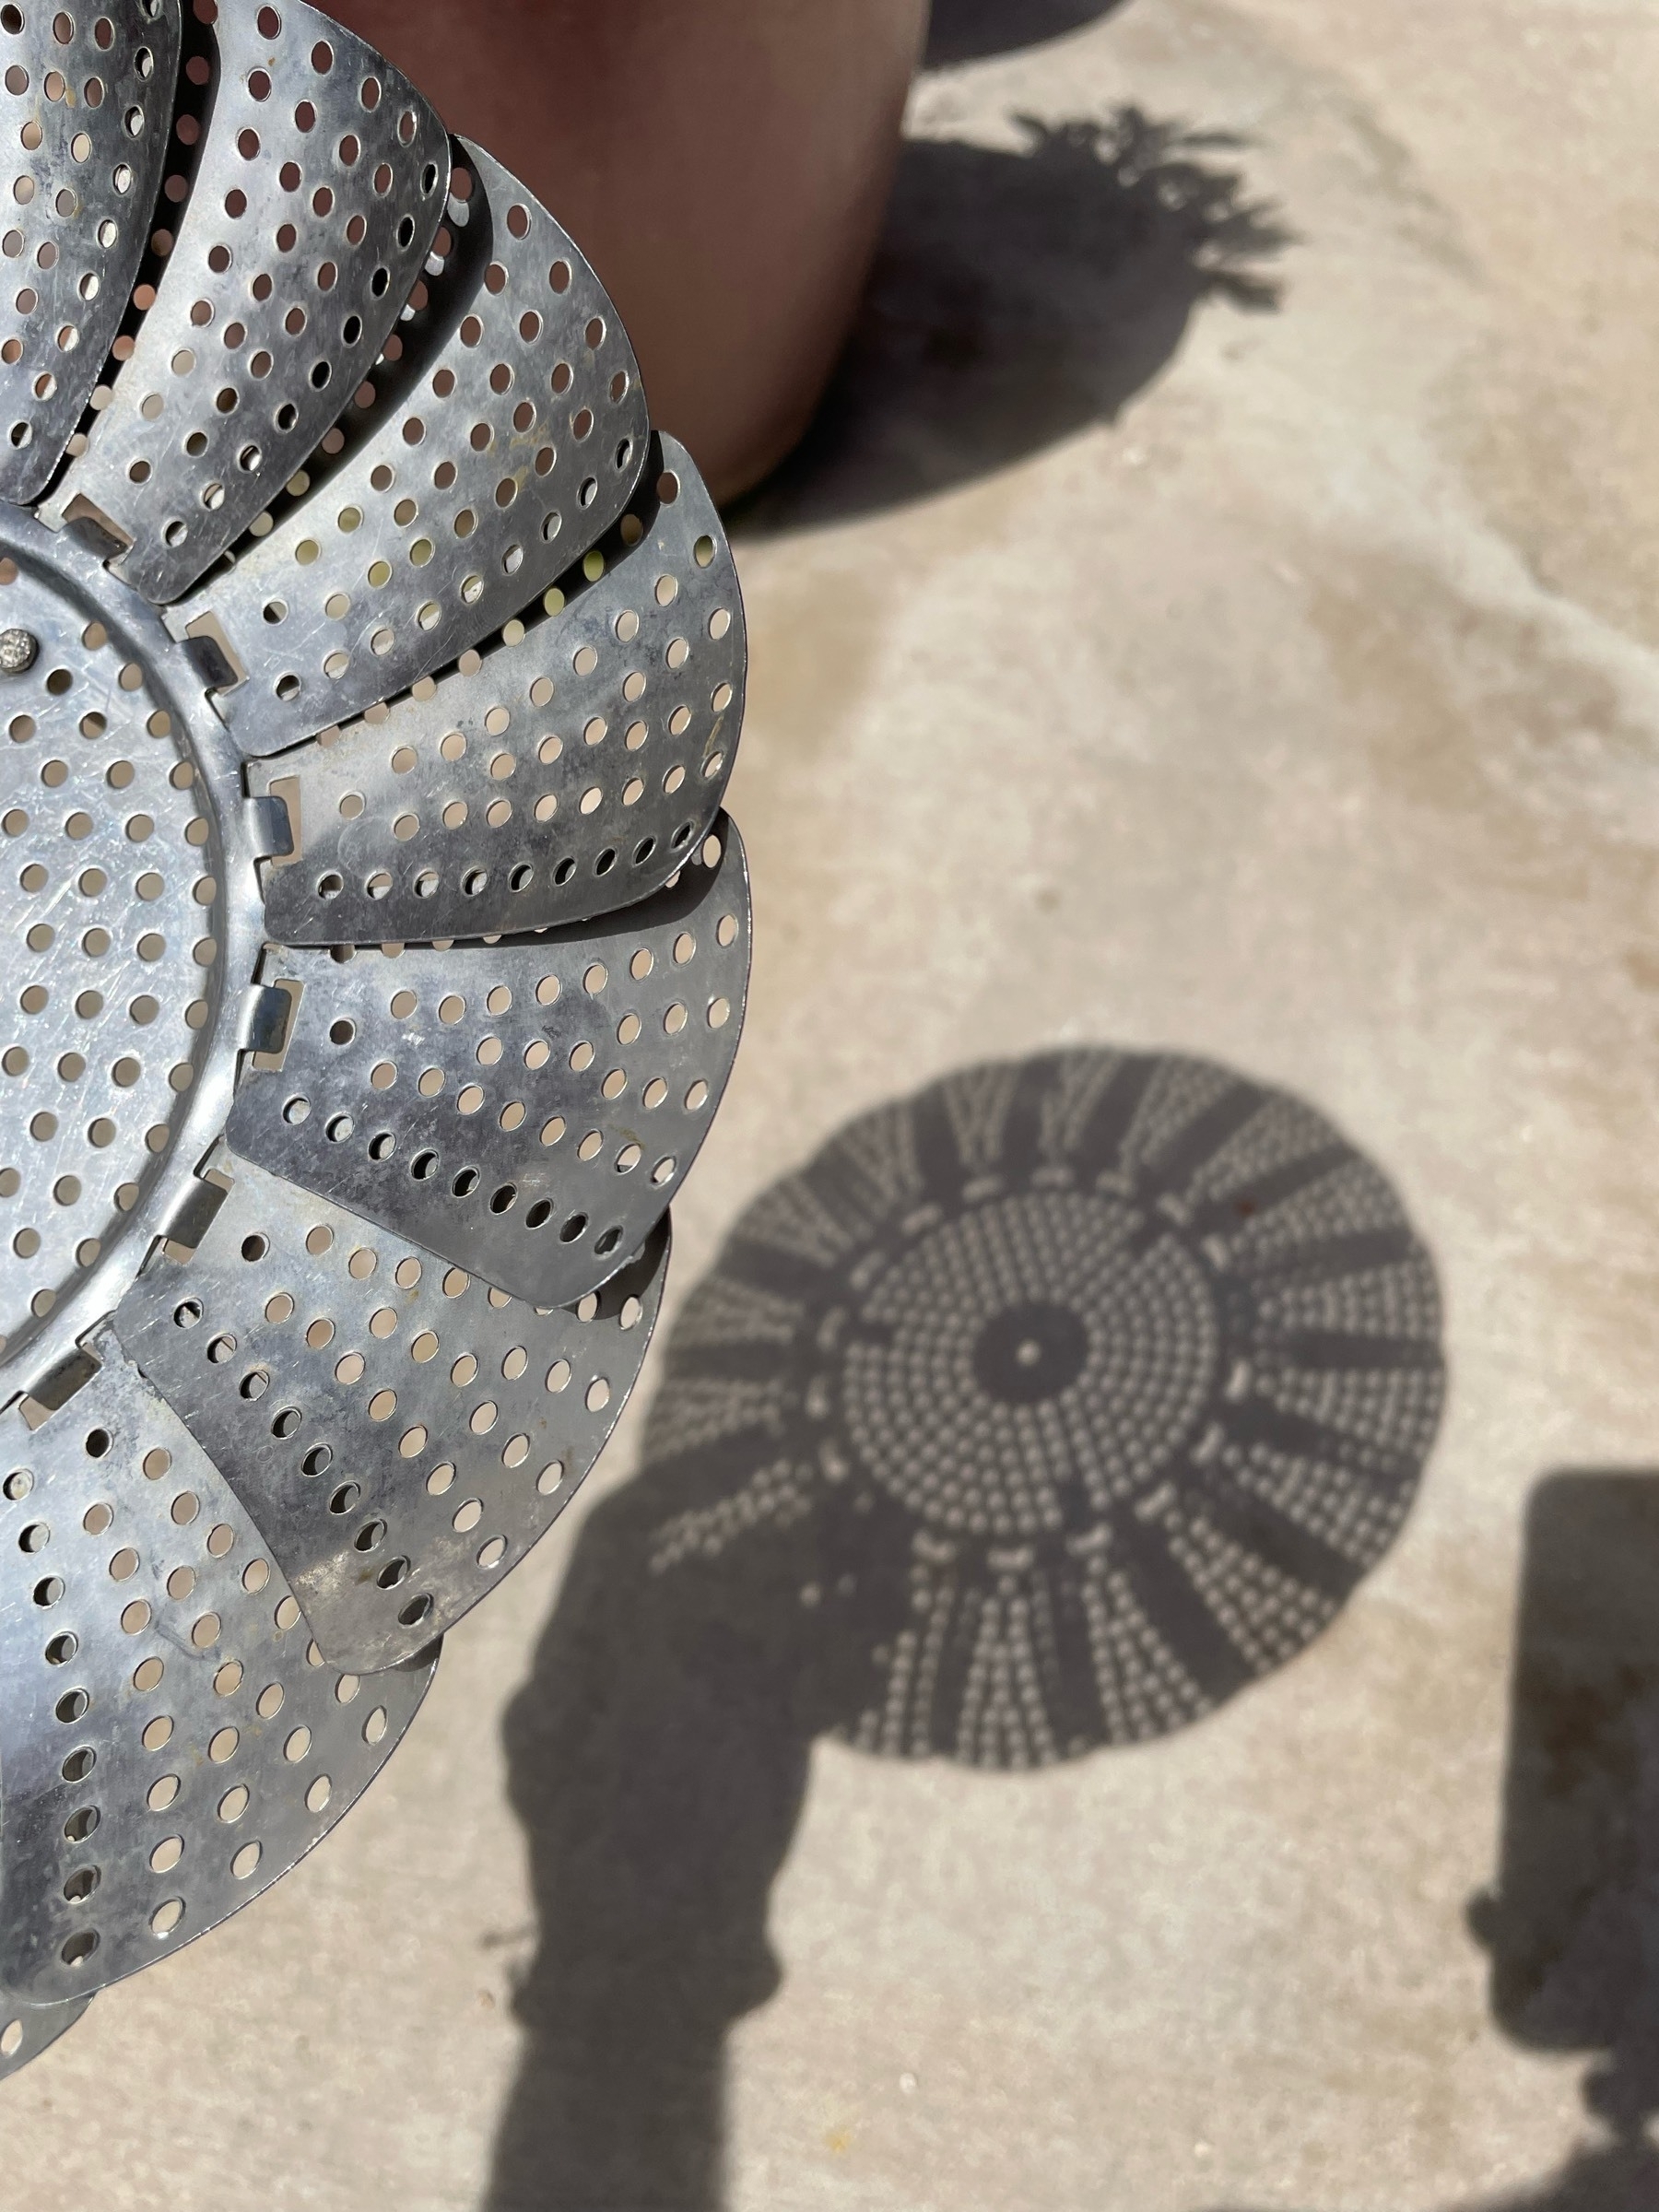 Colander and an eclipse 